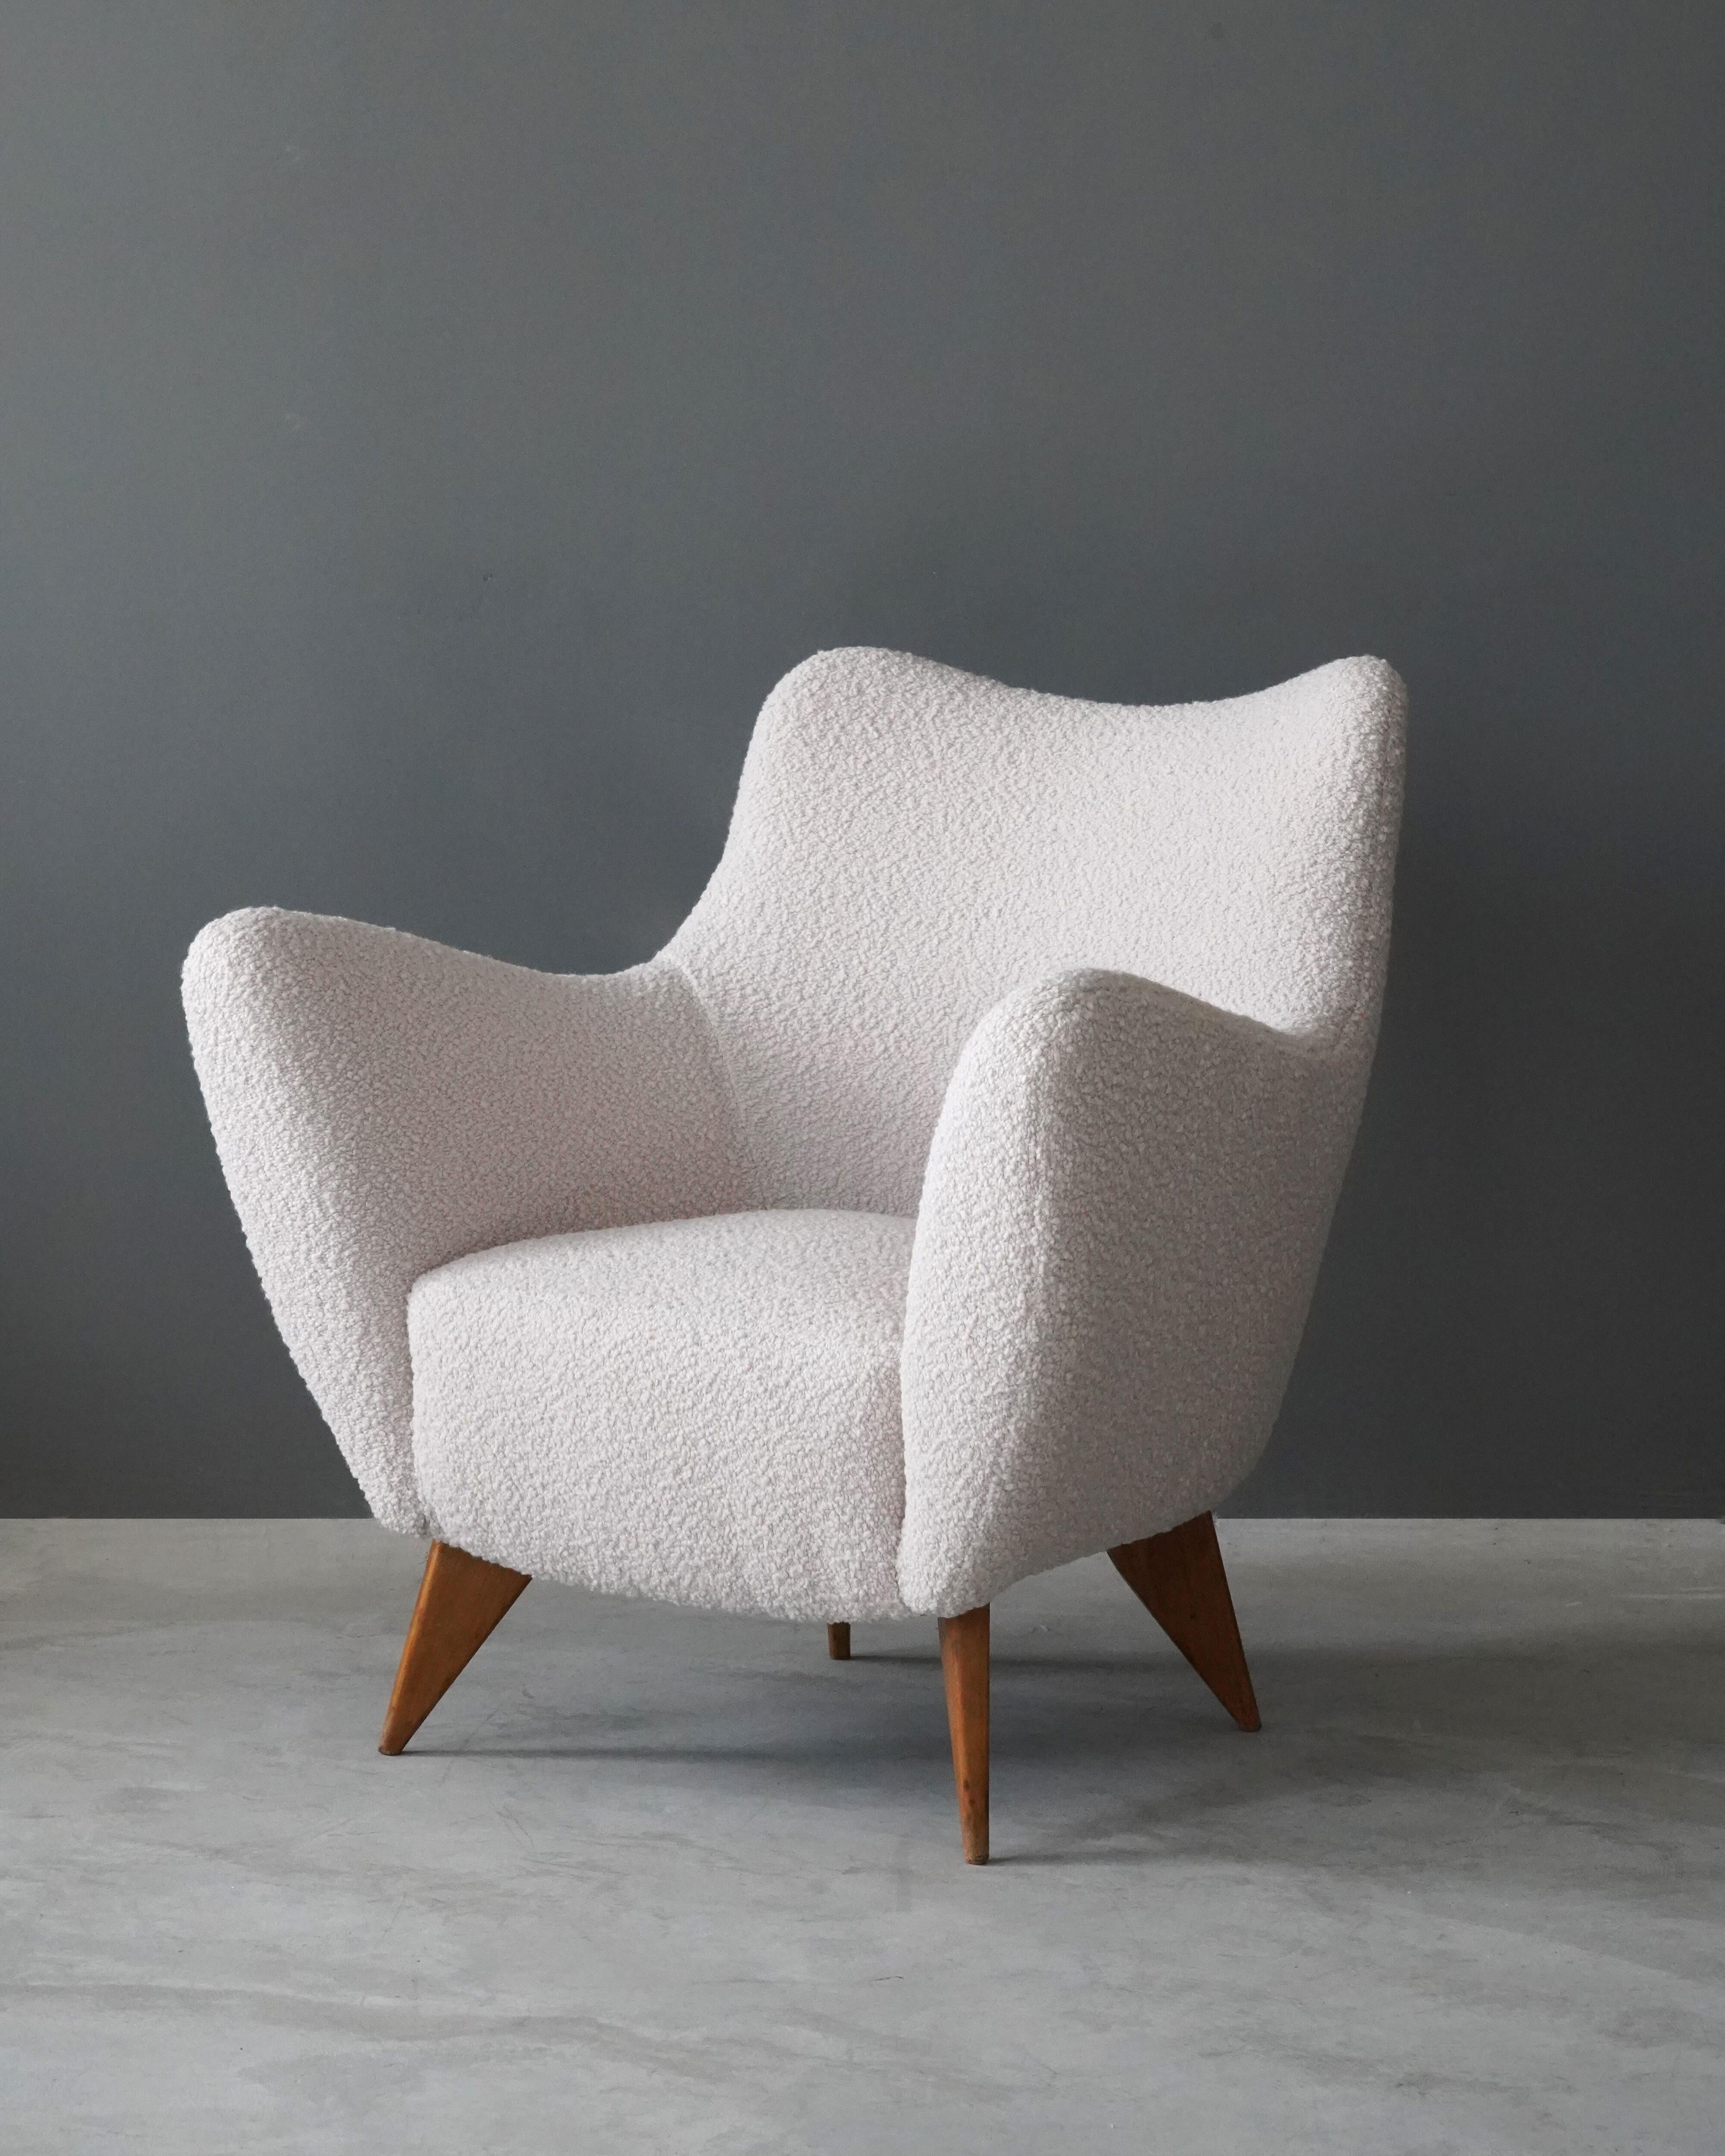 An organic lounge chairs / armchairs. Designed by Guglielmo Veronesi. Produced by I.S.A. Bergamo, Italy, 1950s. Fully restored and reupholstered in a brand new high-end white bouclé fabric. Legs in walnut.

Other designers working in the organic